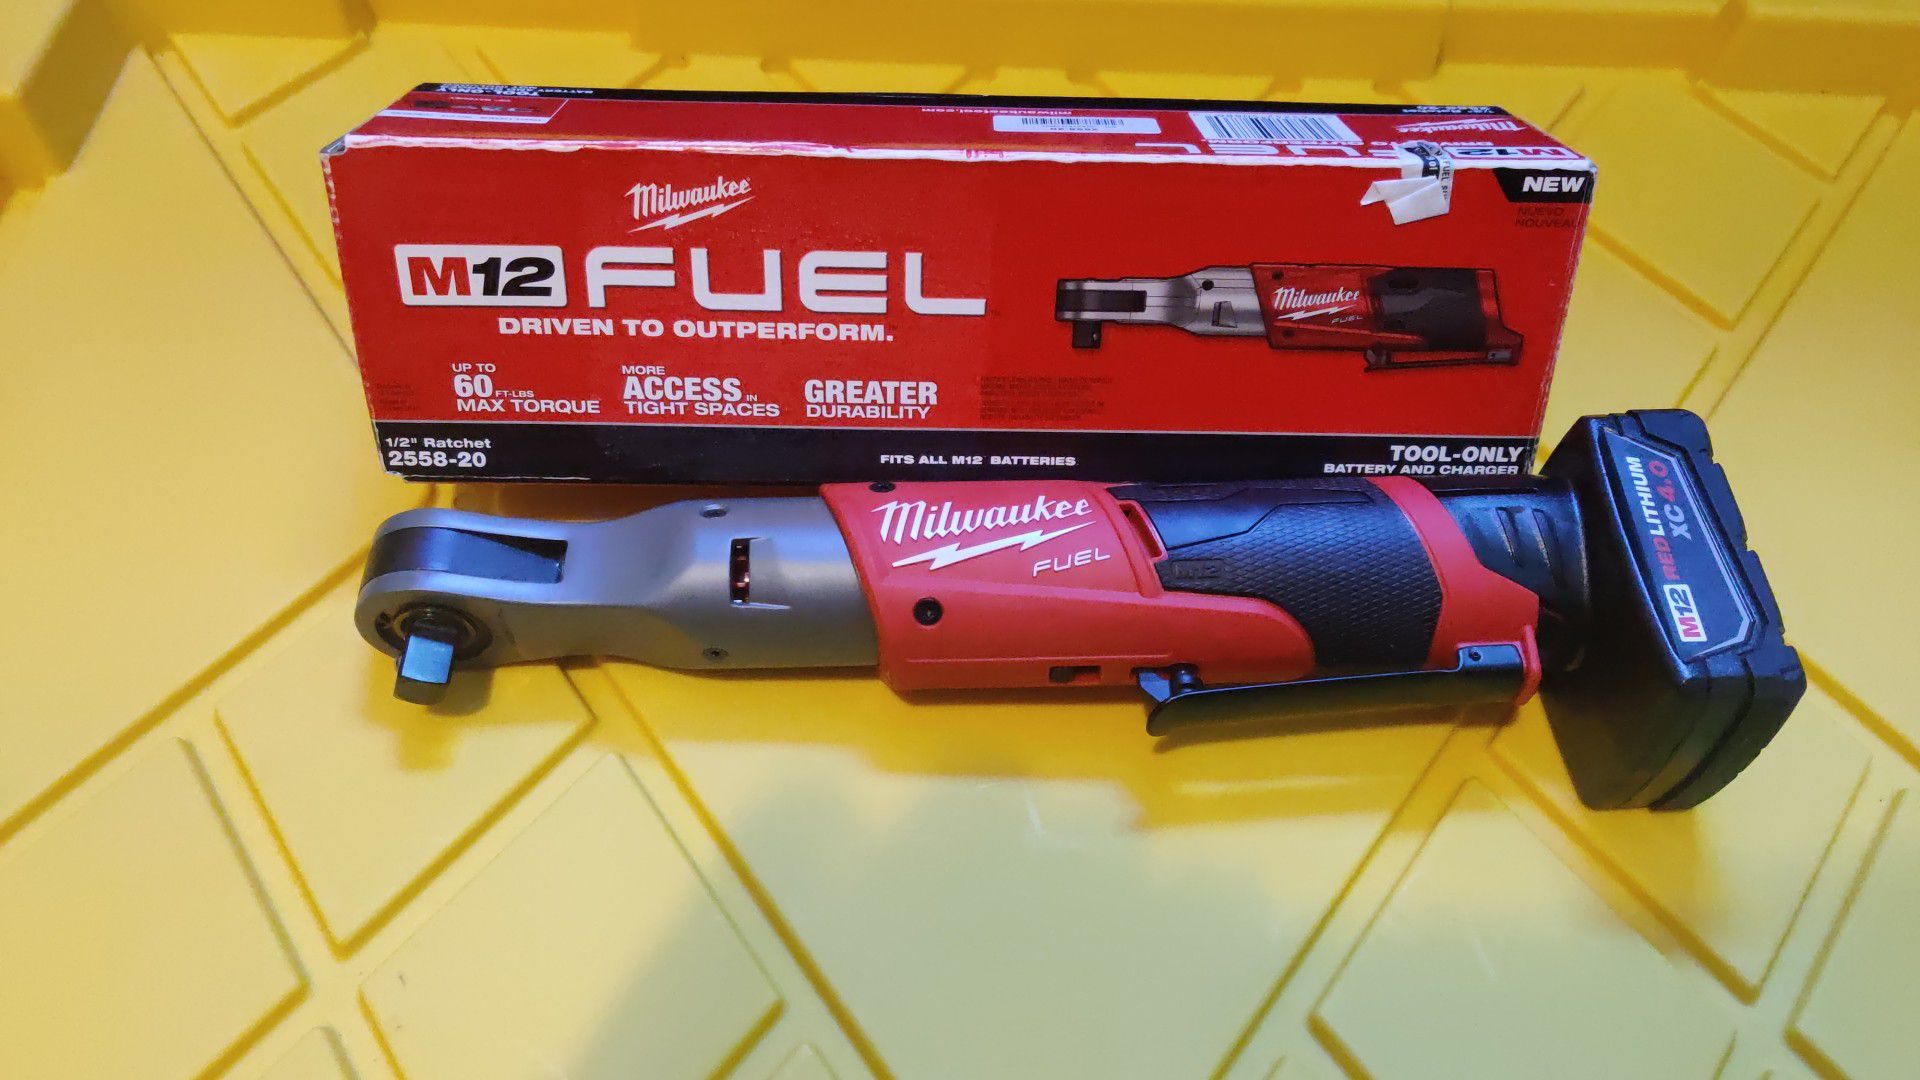 MILWAUKEE M12 FUEL 1/2" RATCHET BRUSHLESS TOOL WITH 4.0AH BATTERY NEW $145